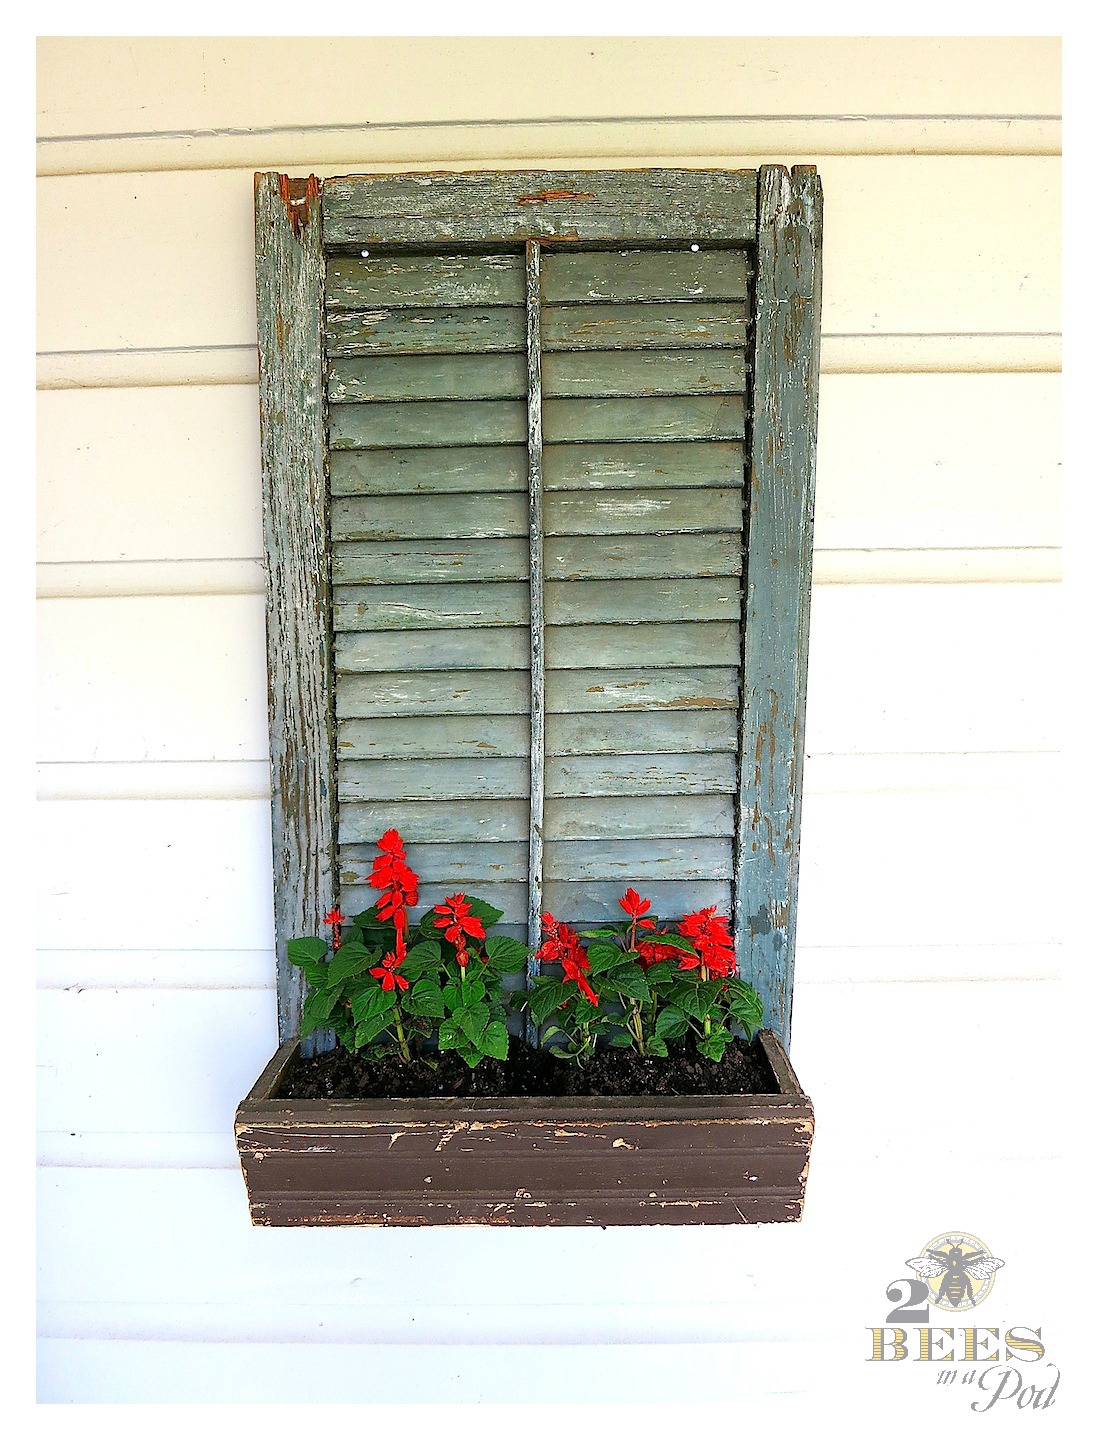 Front Porch Refresh makeover using an outdoor rug, vintage finds and new flowers.